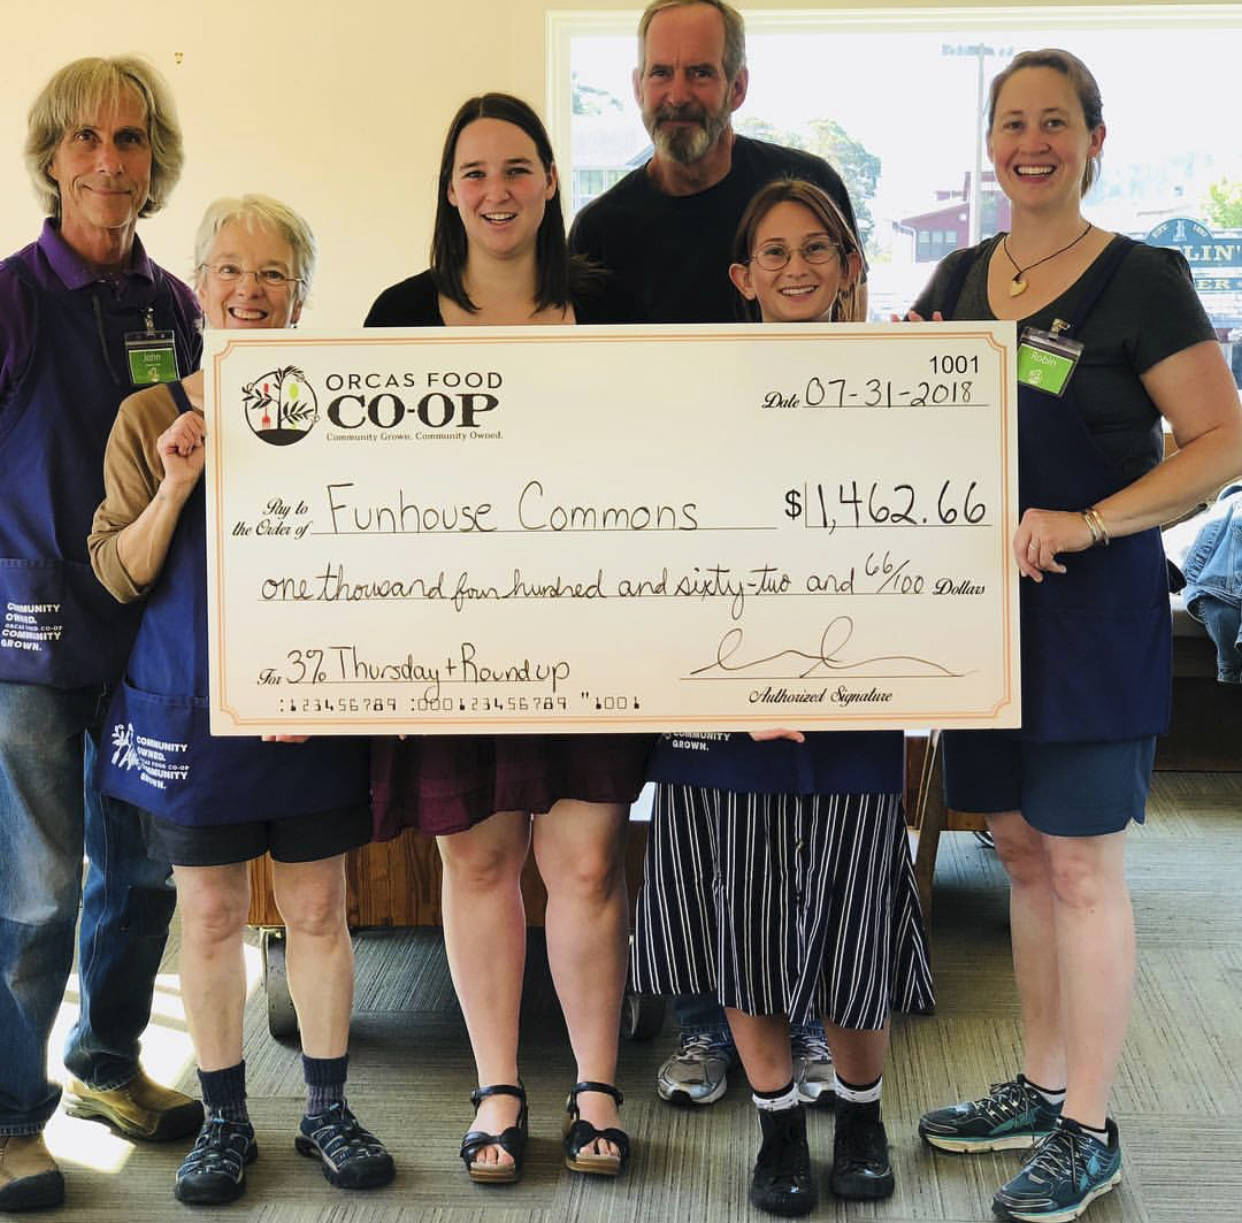 Co-op gives $1,400 to Funhouse